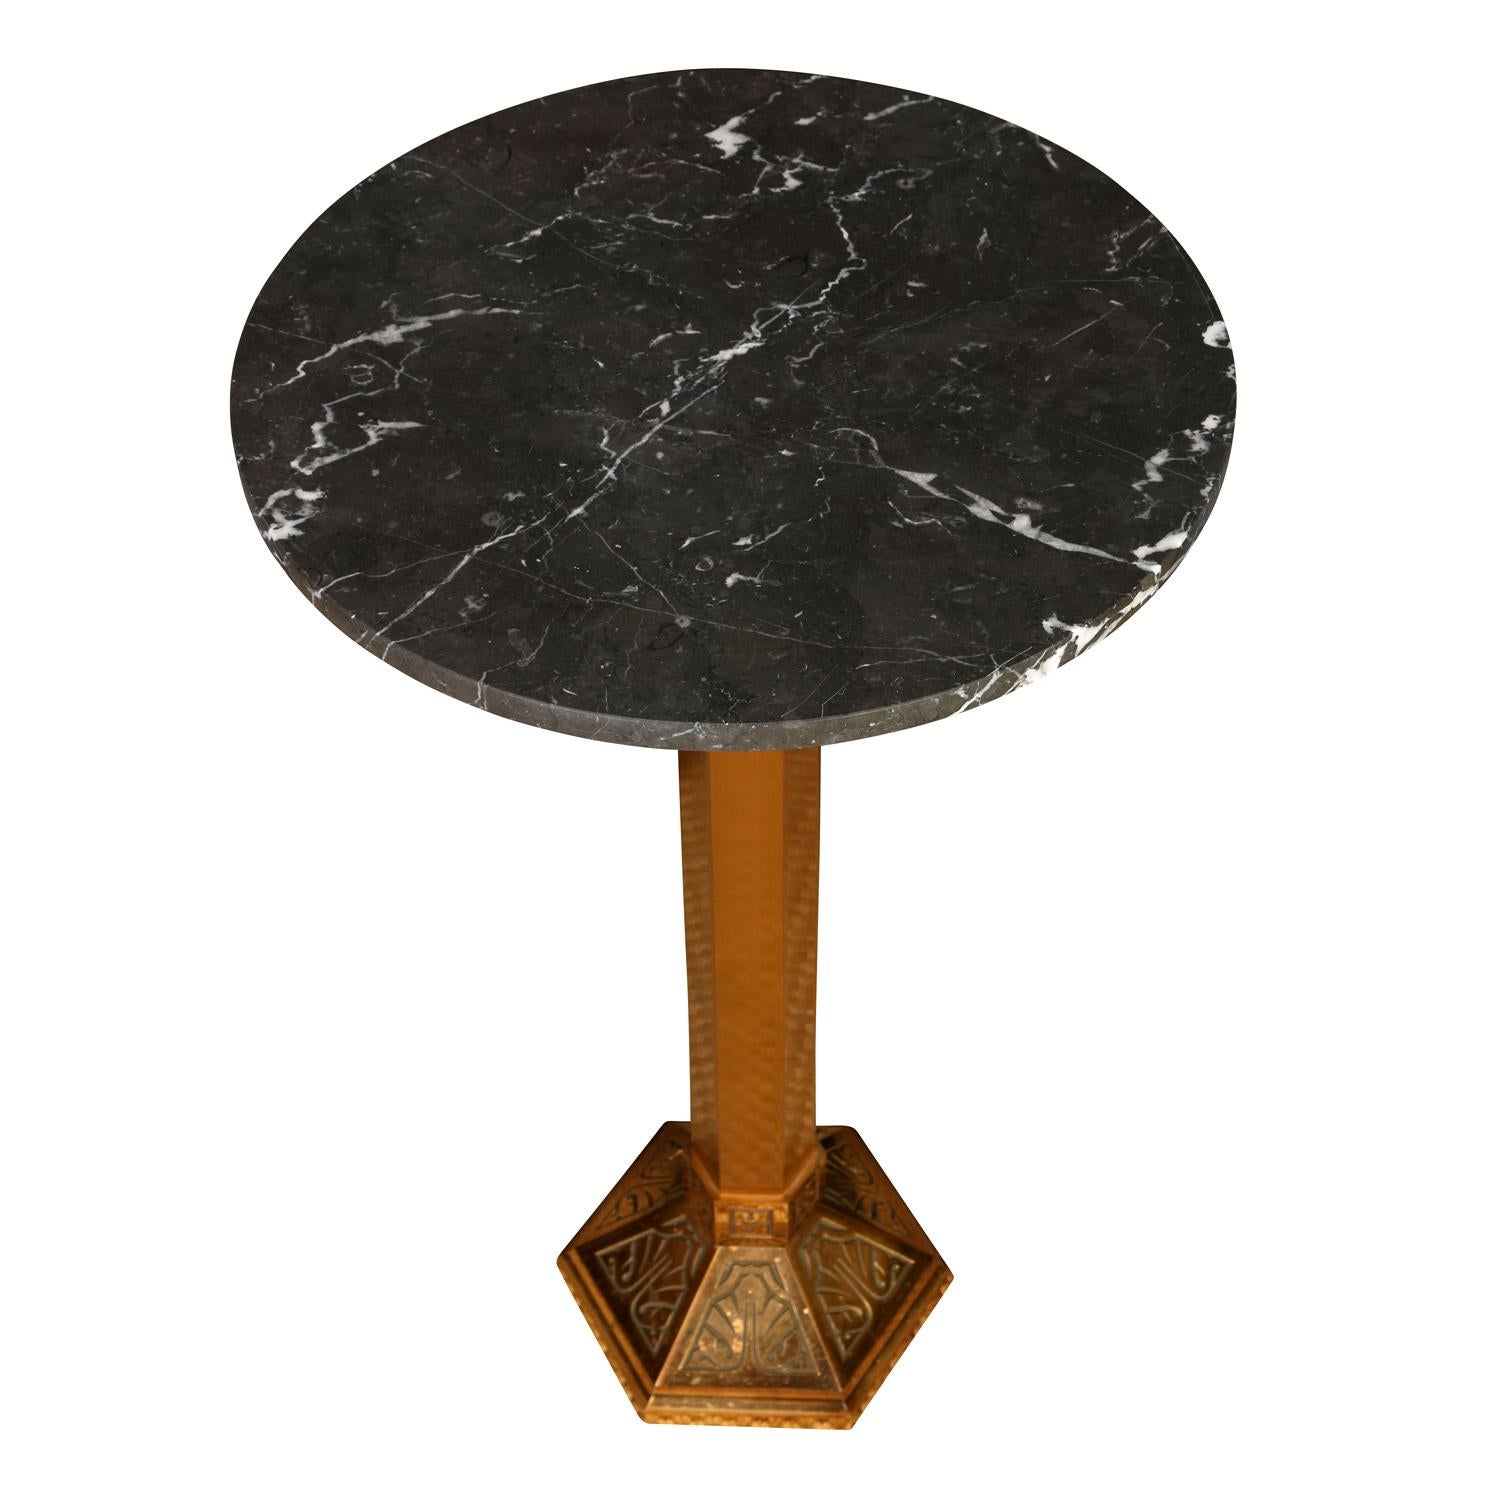 A pair of Art Deco style drinks tables, each with a deco detailed hexagonal brass base and round black marble top.